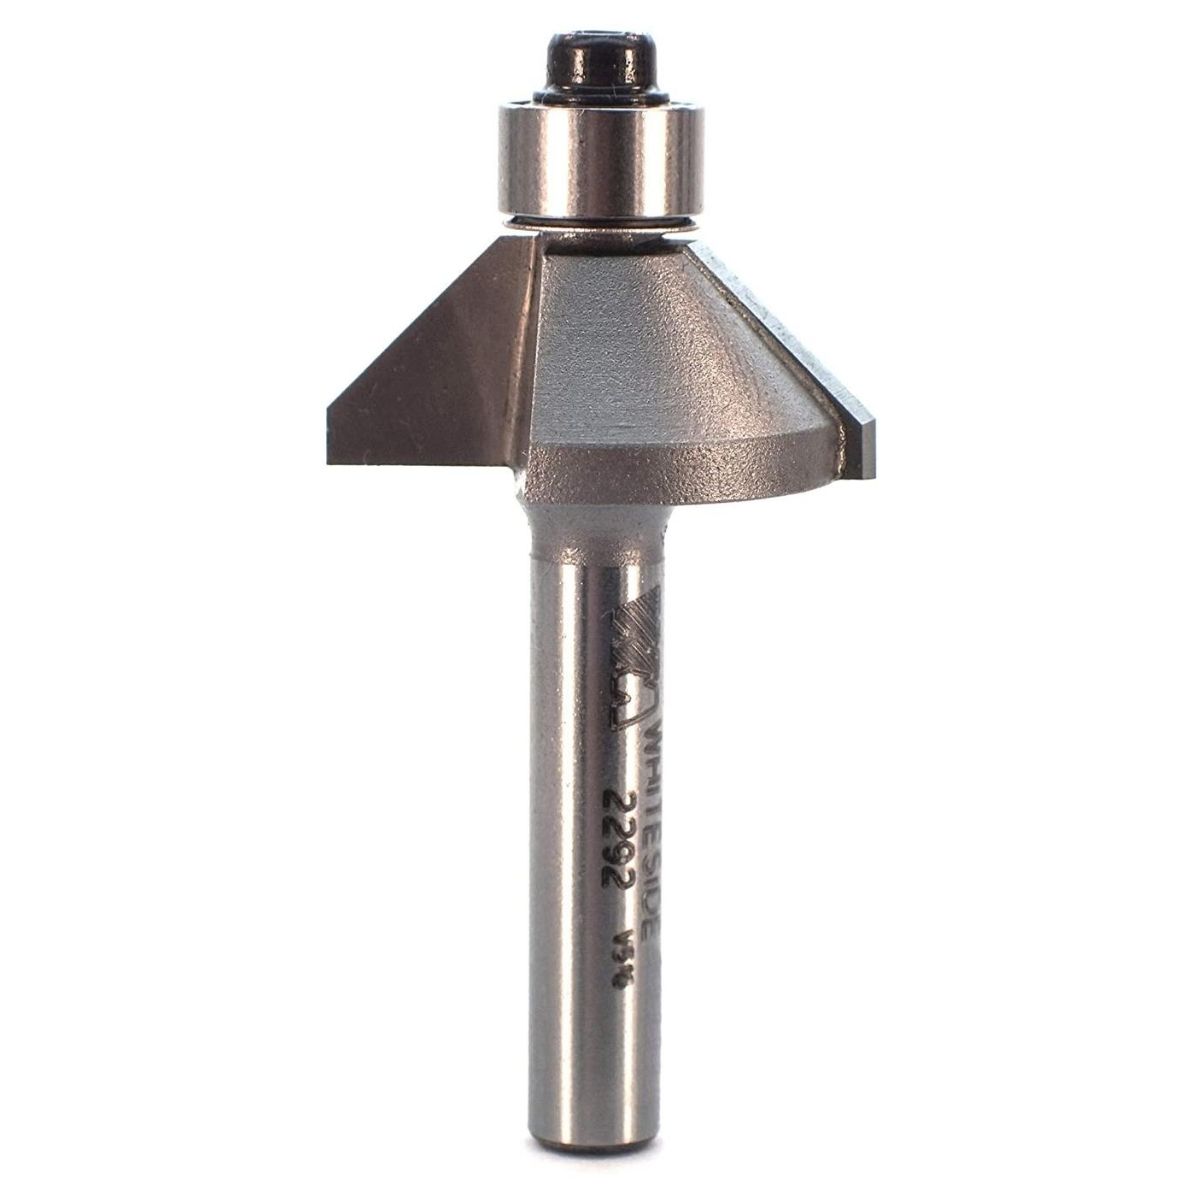 The Router Bit Types Option: Chamfer